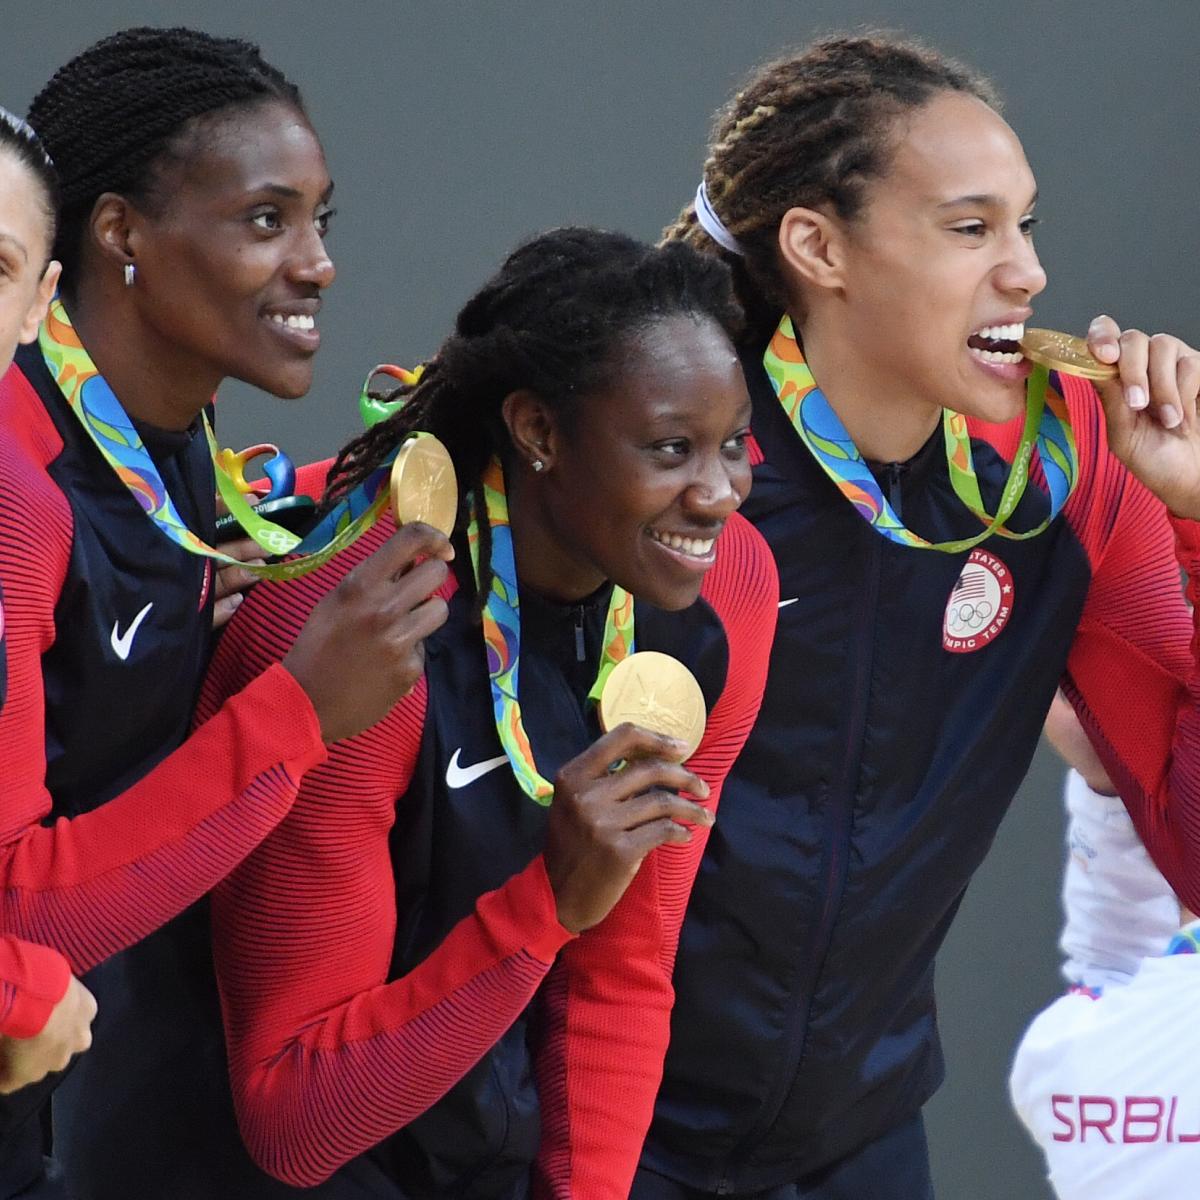 WNBA Players Hope Olympic Gold Offers Larger Platform to Expand Social